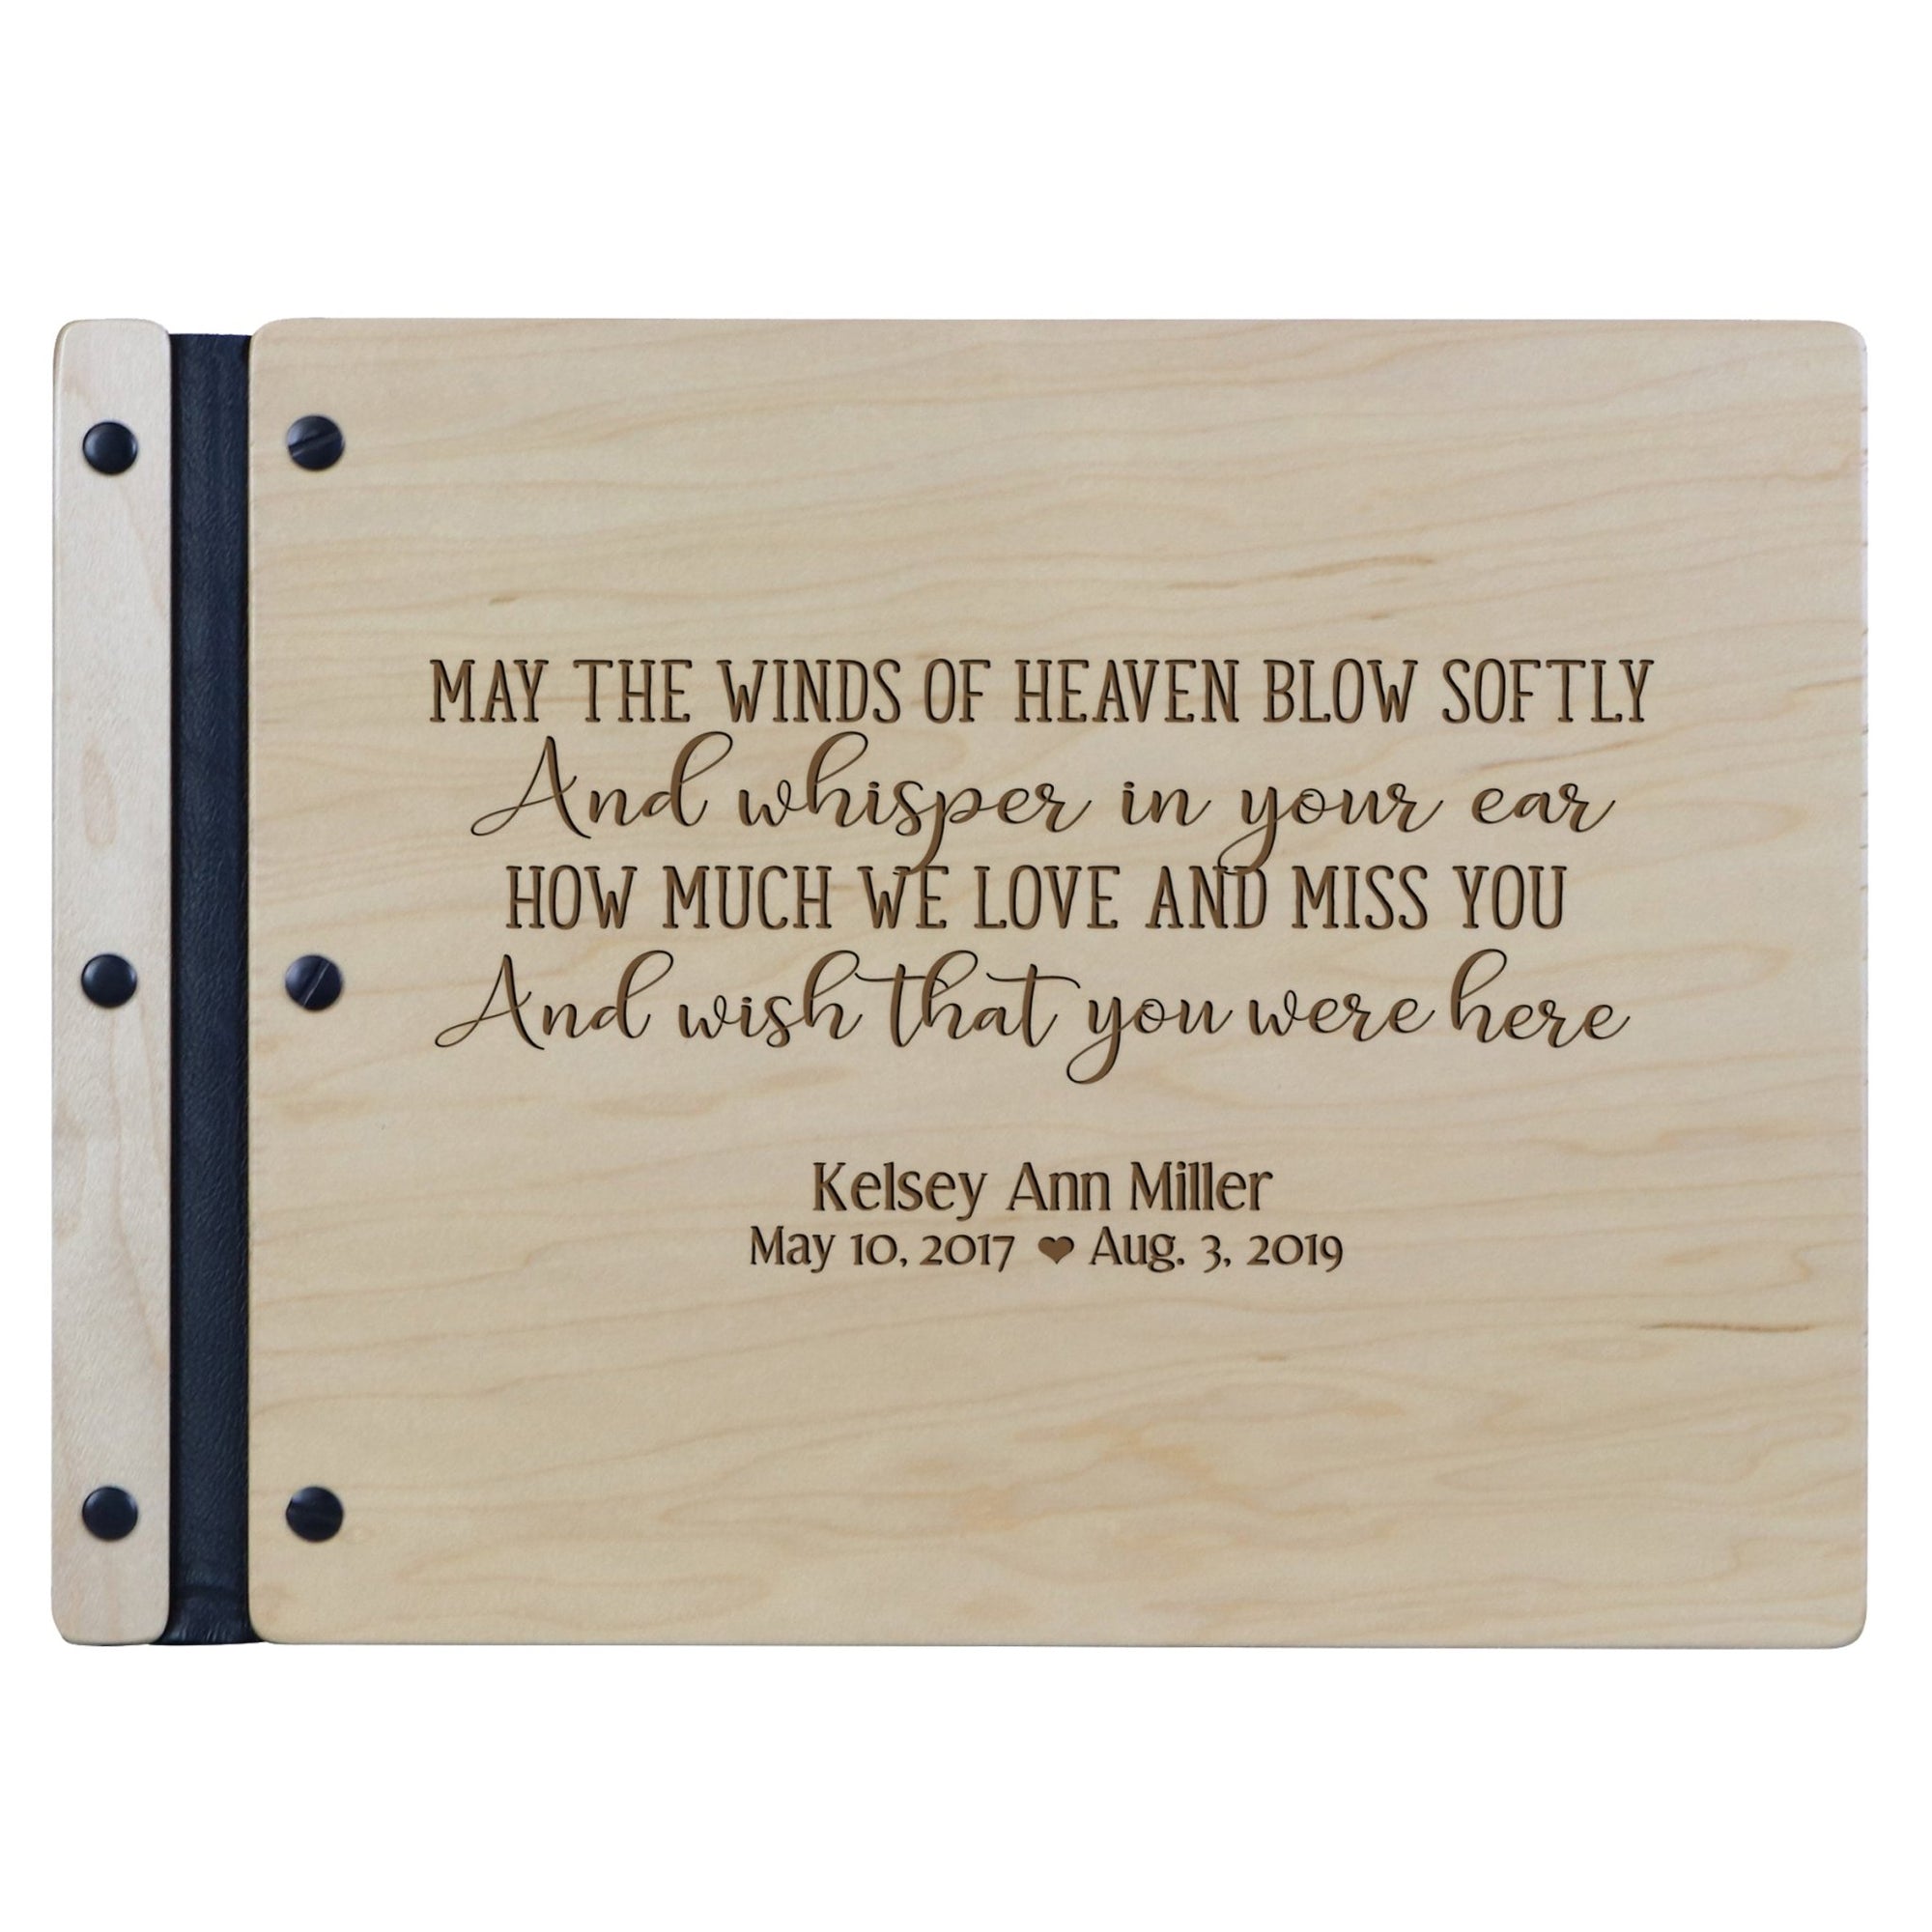 Personalized Memorial Guest Book - May The Winds - LifeSong Milestones